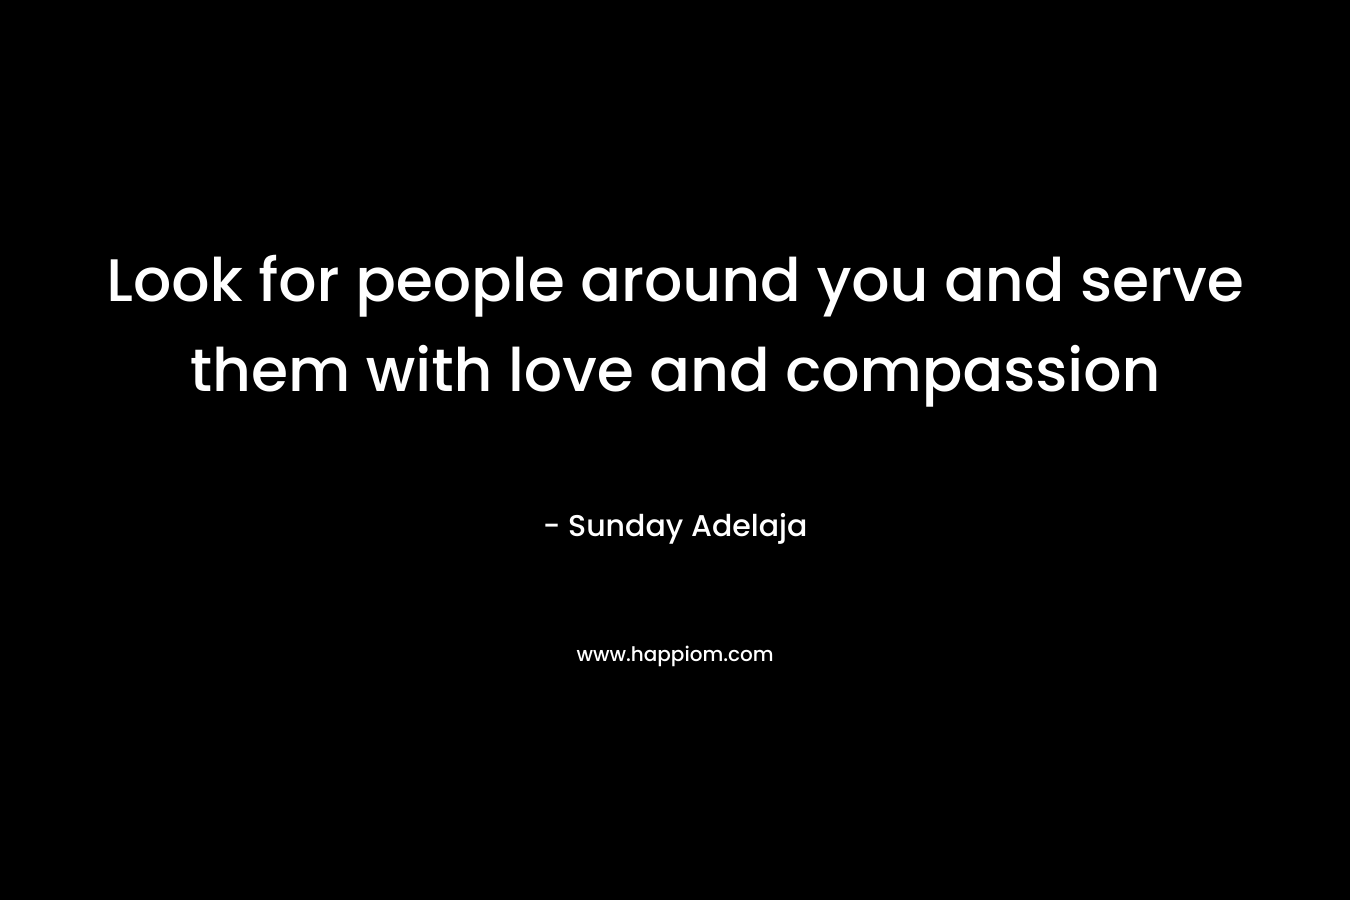 Look for people around you and serve them with love and compassion